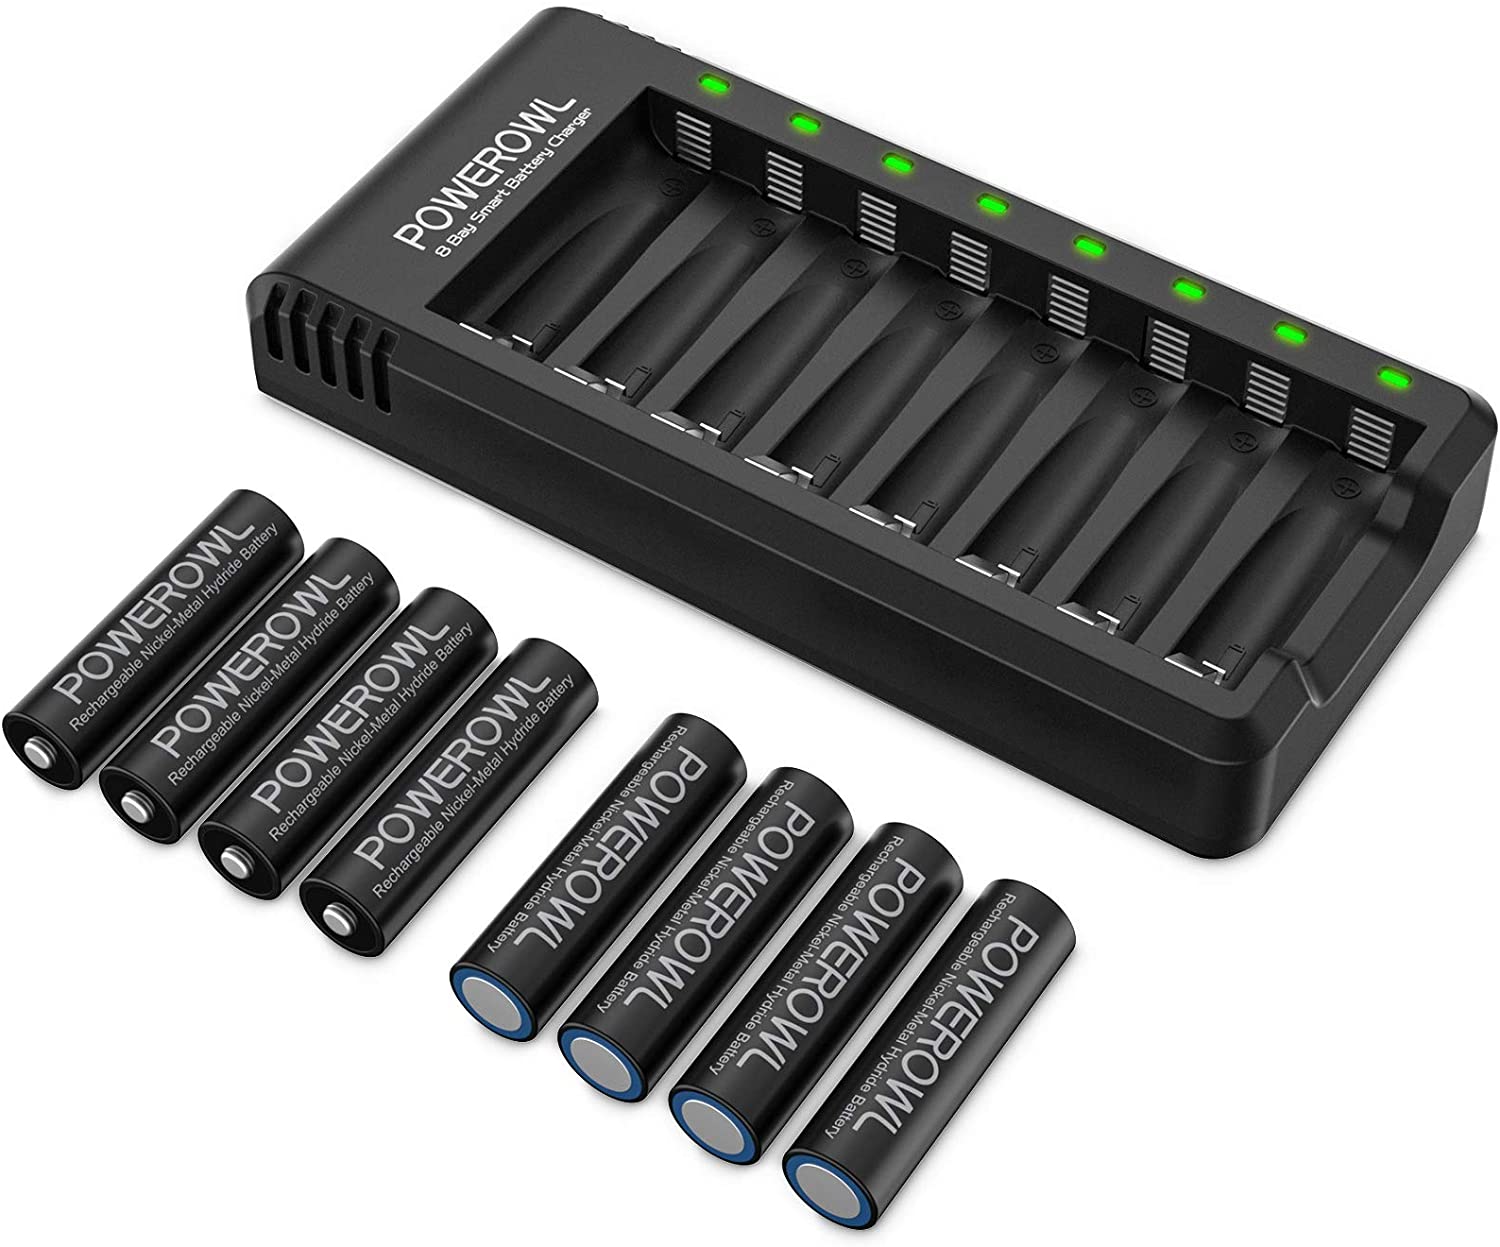 Rechargeable AA Batteries with Charger, POWEROWL 8 Pack of 2800mAh High Capacity Low Self Discharge Ni-MH Double A Batteries with Smart 8 Bay Battery Charger (USB Fast Charging, Independent Slot)